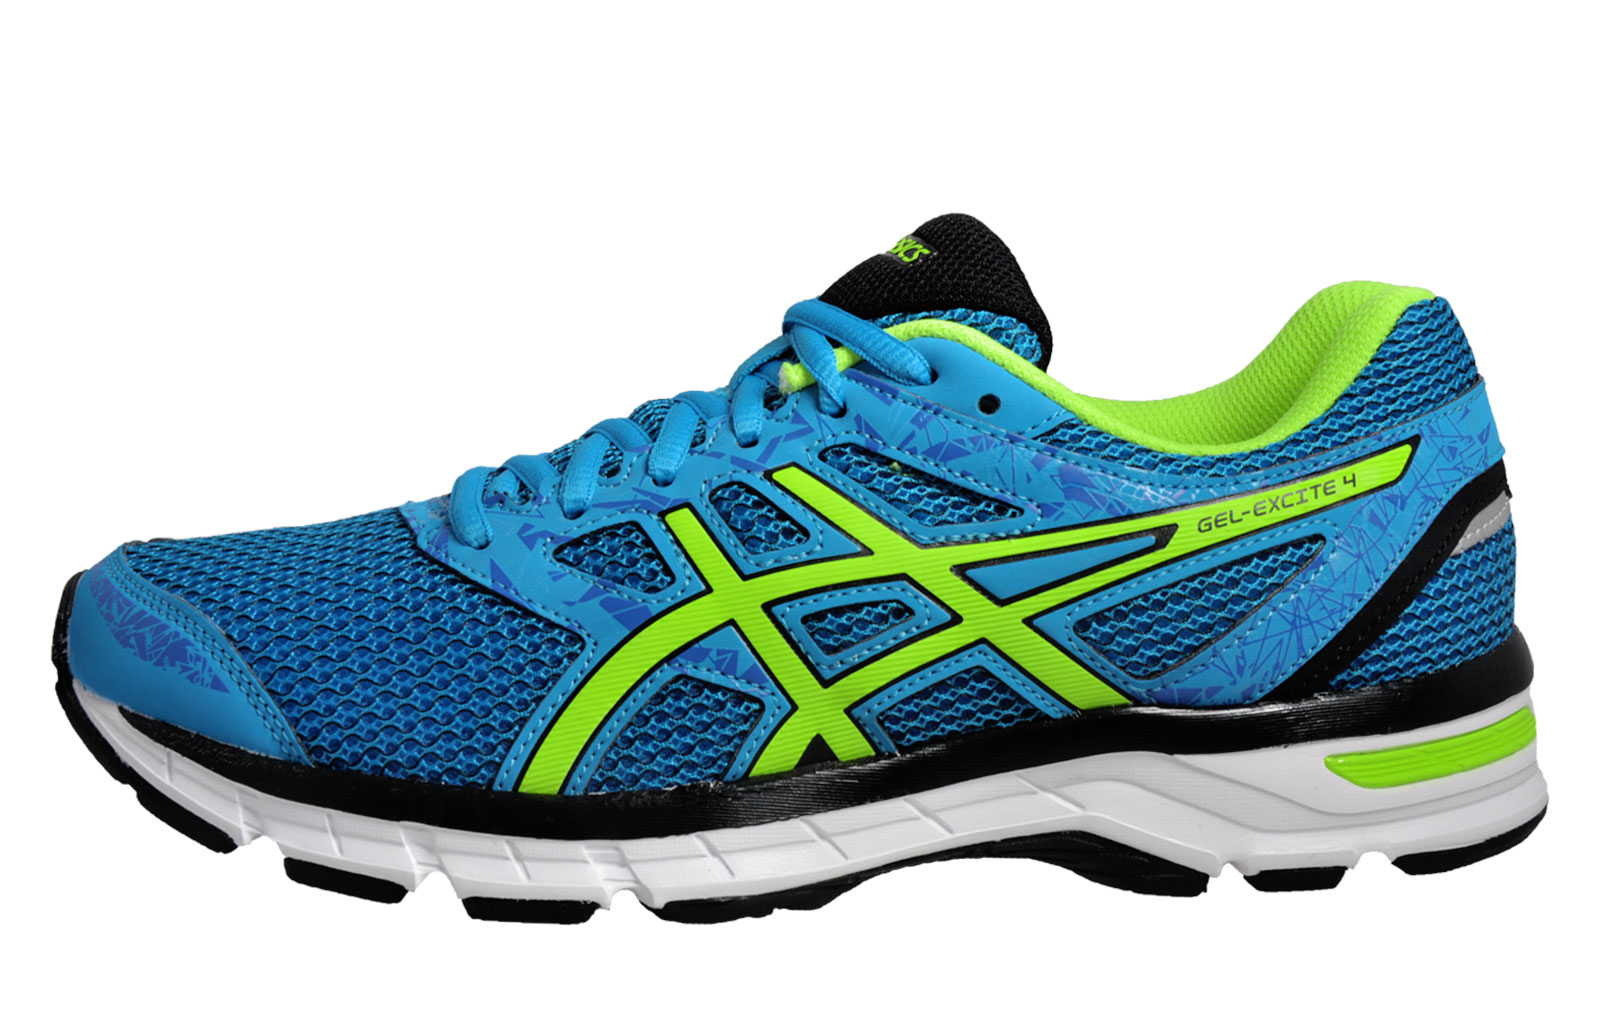 Asics Gel-Excite 4 Mens Running Shoes Gym Fitness Trainers Blue | eBay